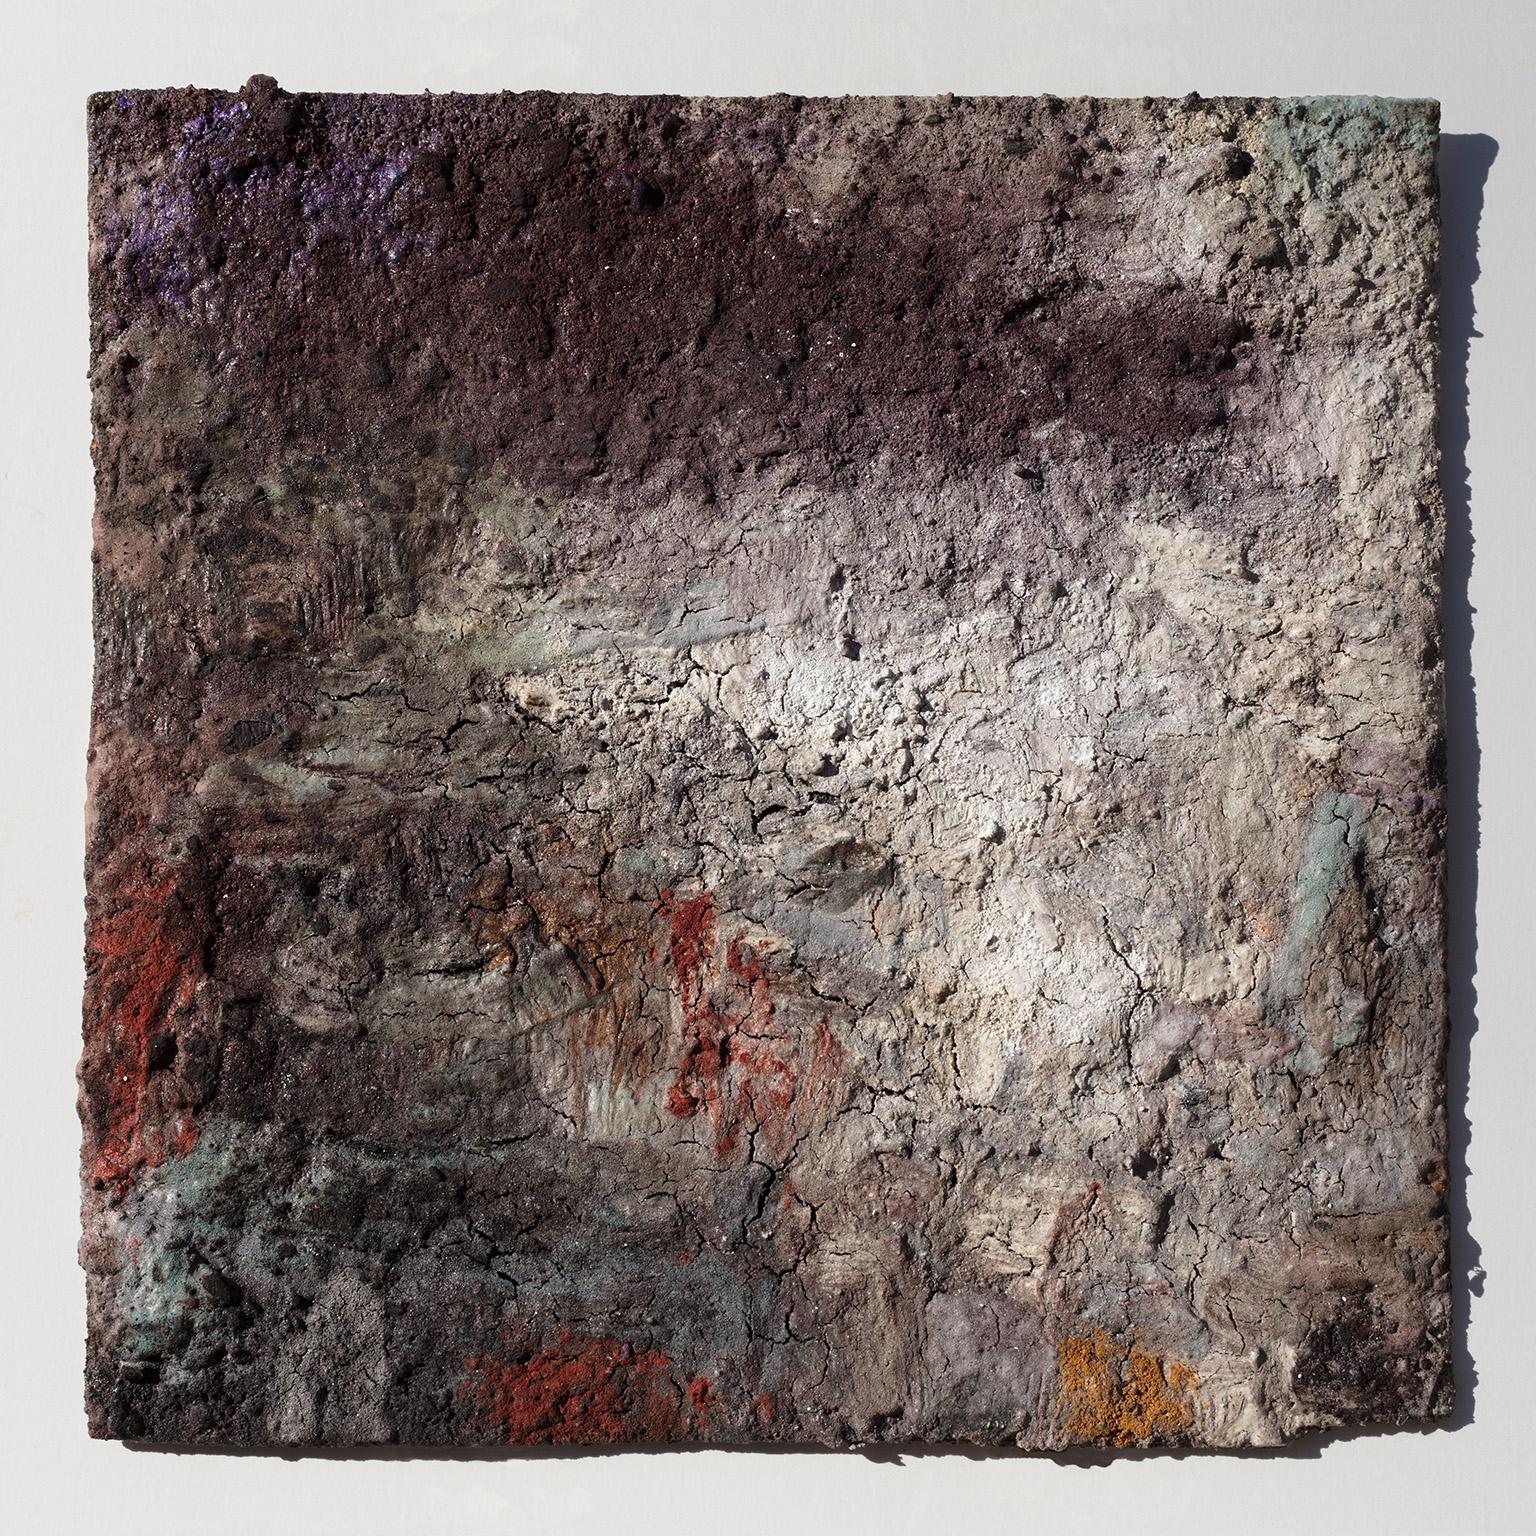 Terra Bruciata (Scorched Earth) # - Small Abstract Painting